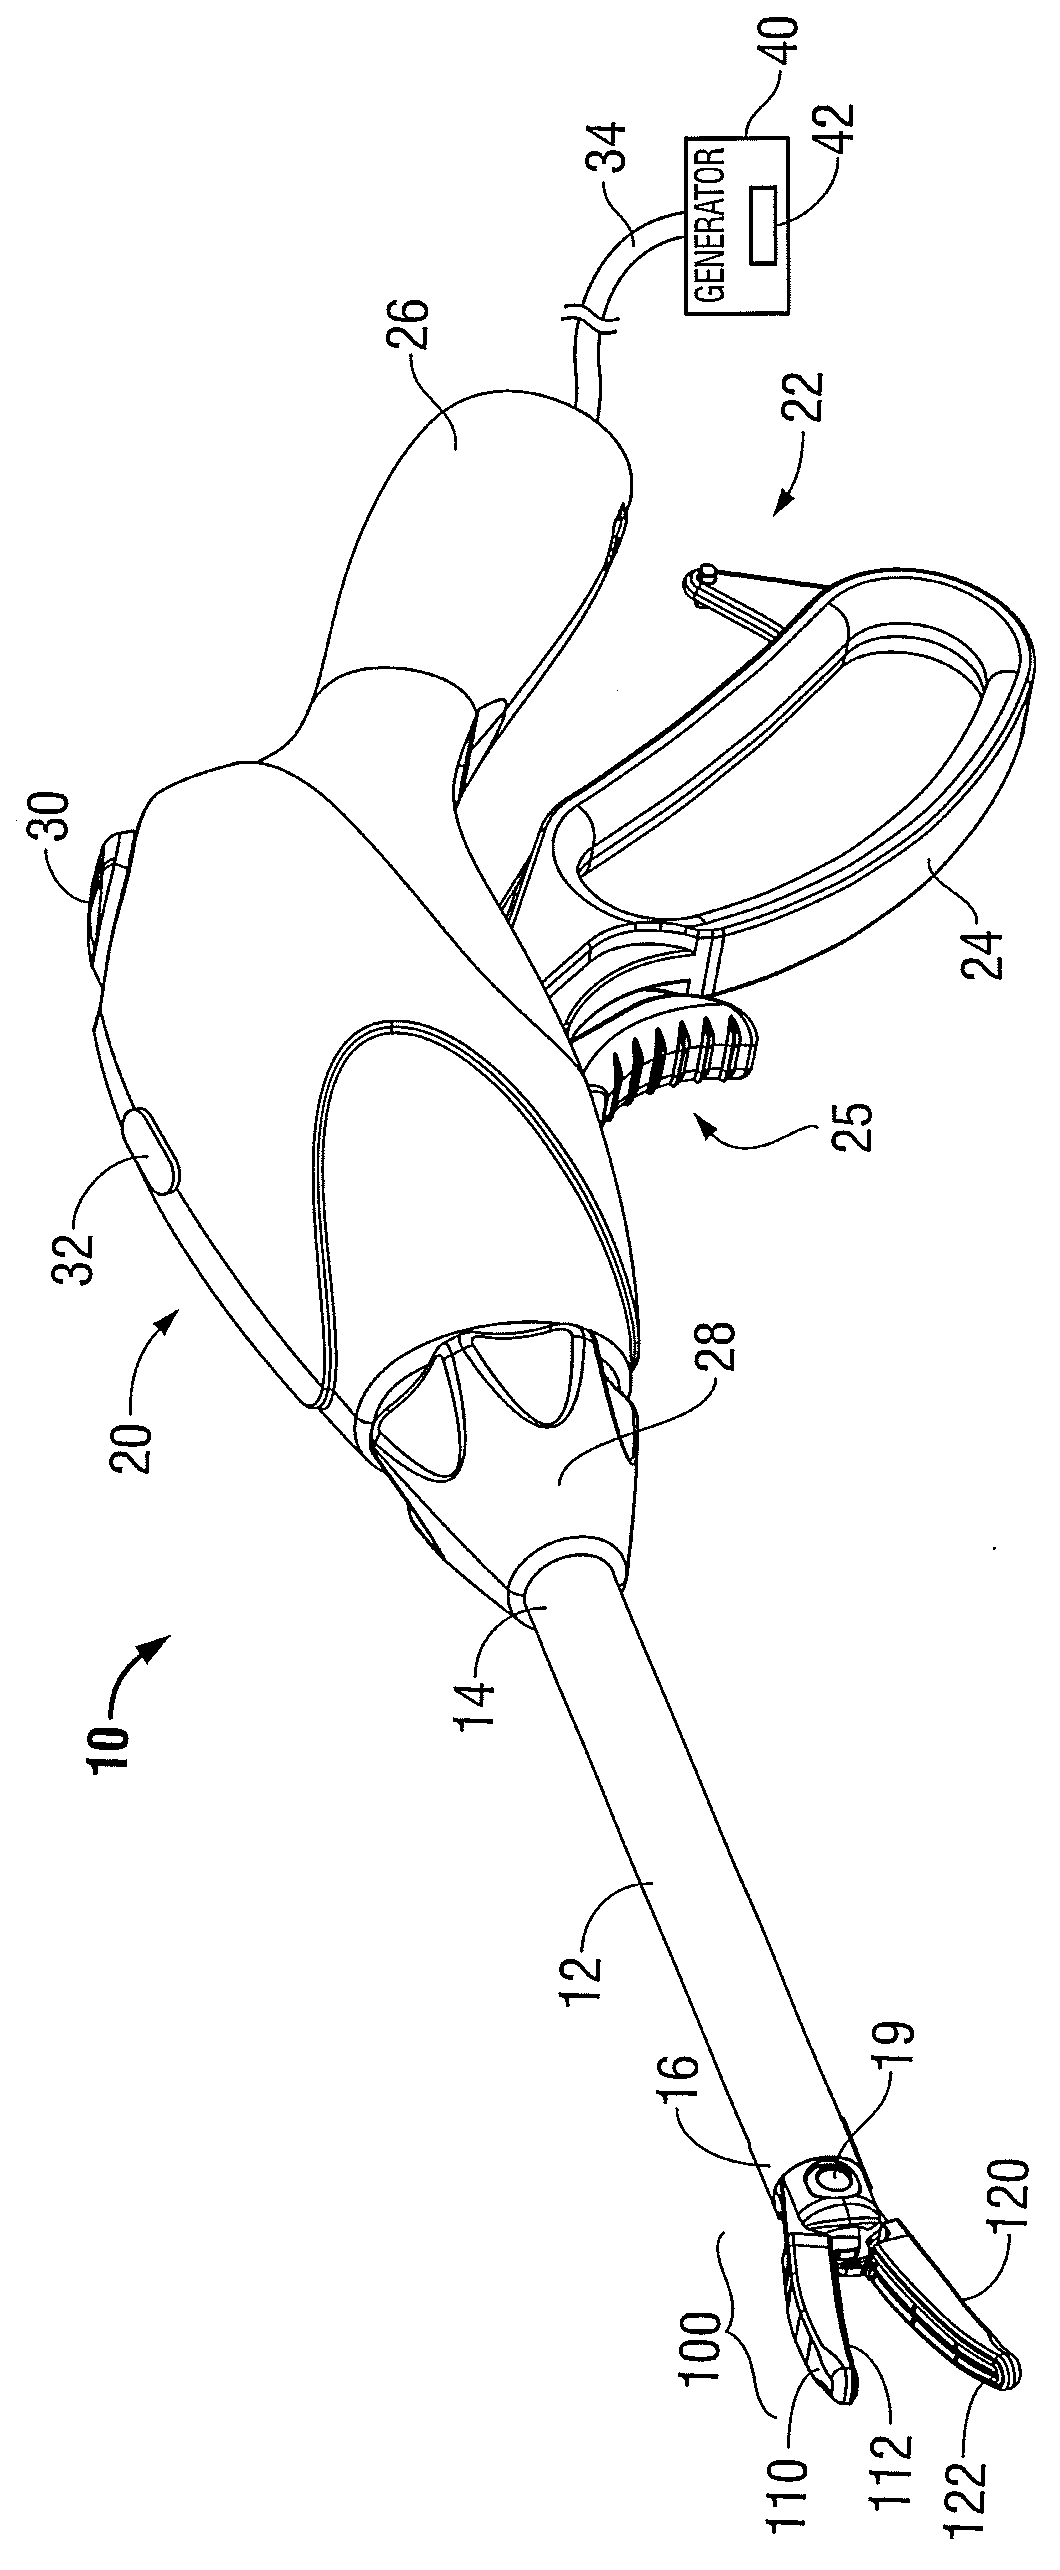 Light energy sealing, cutting and sensing surgical device